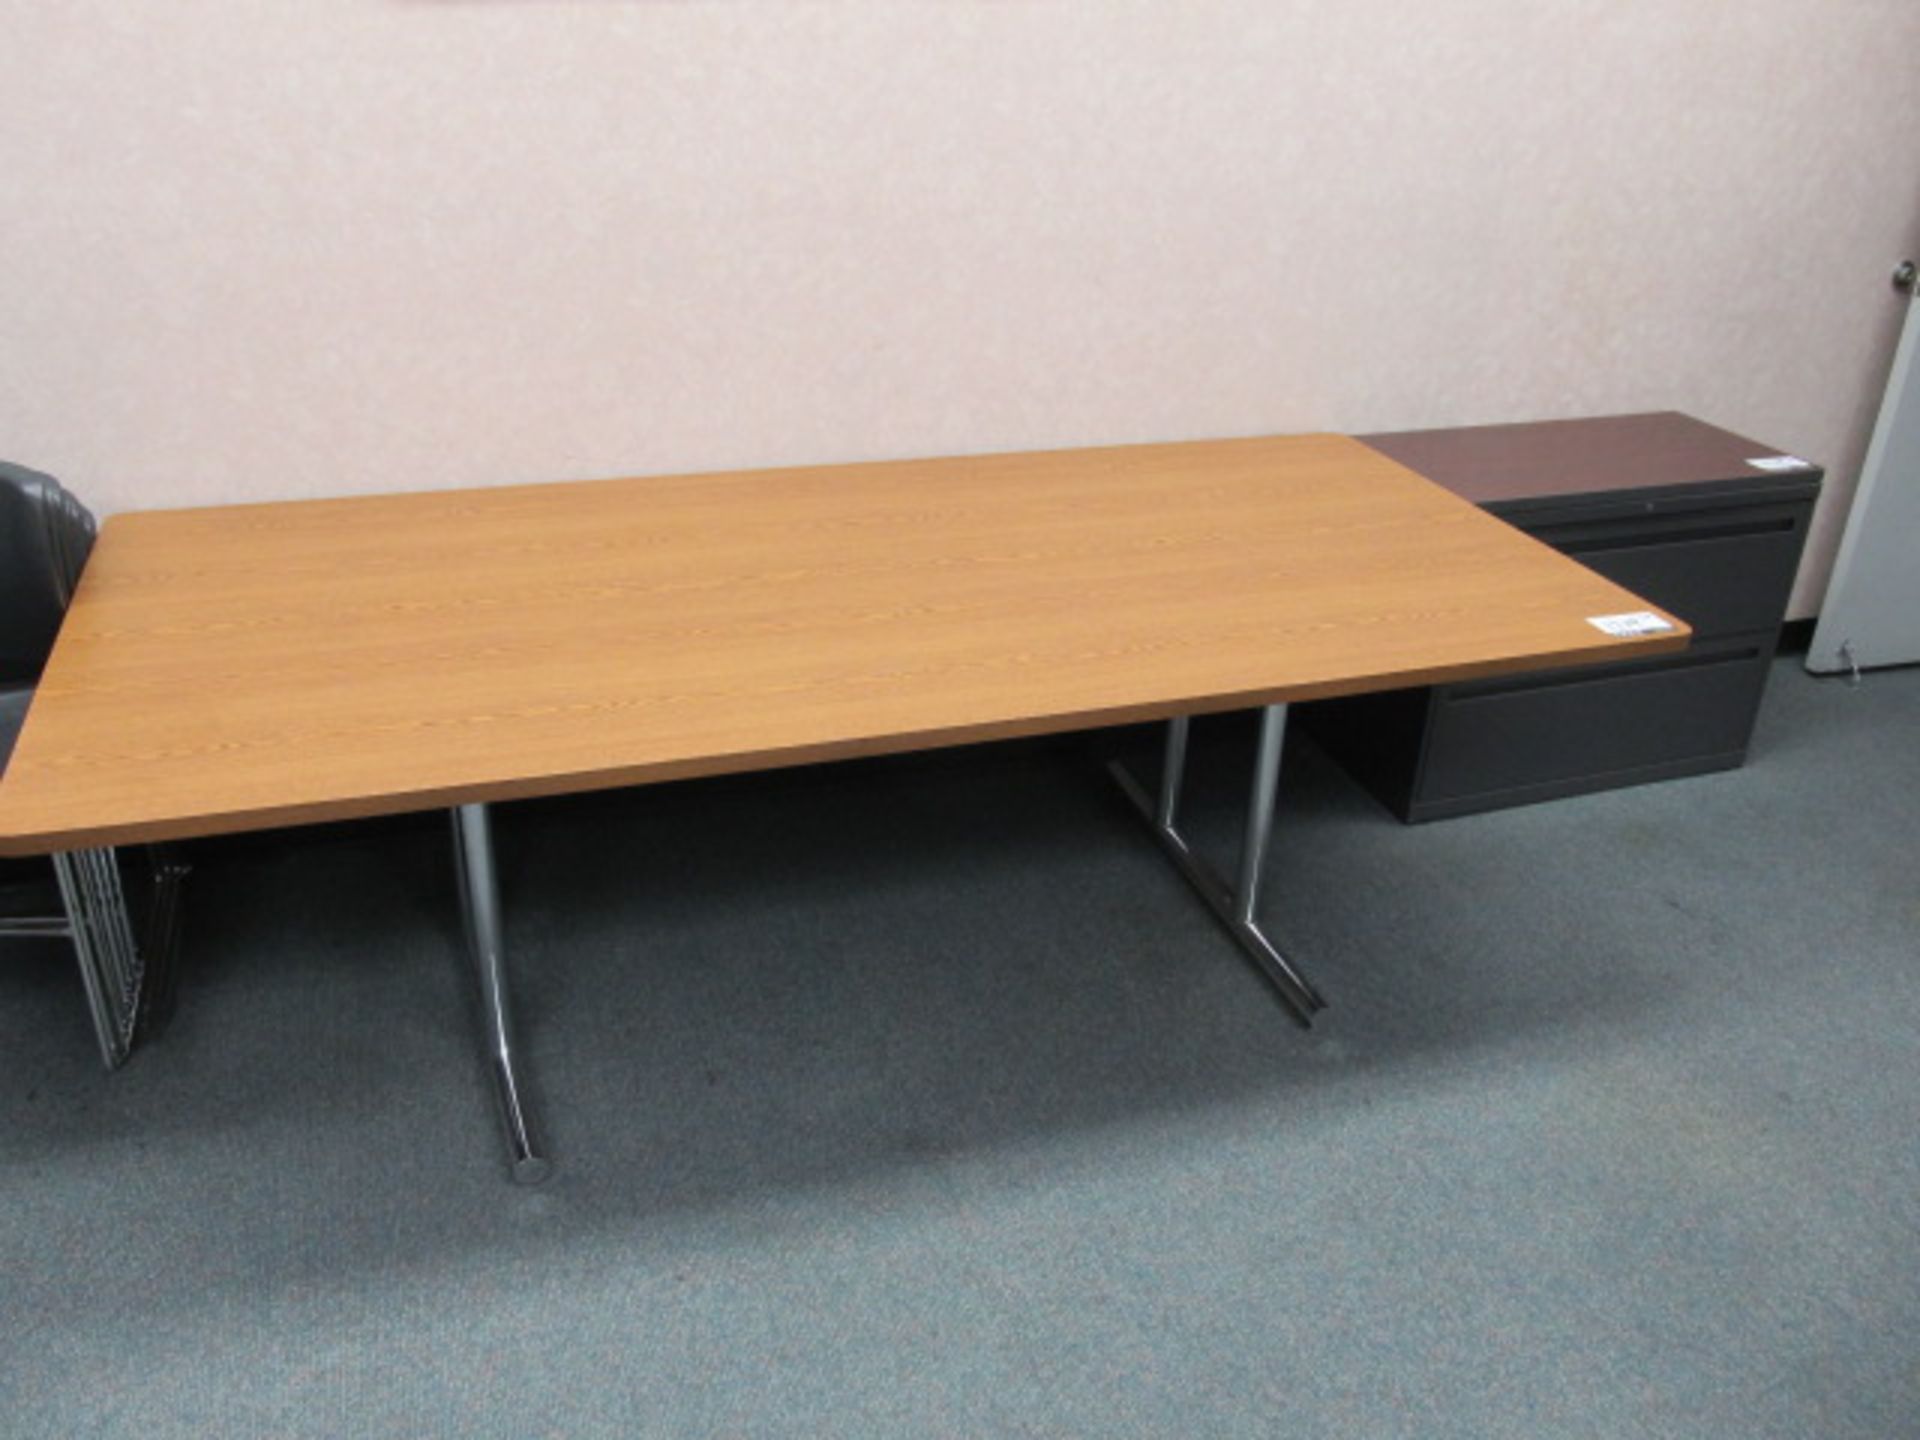 Lot (1) Wood Conference Table, Measure Appox. 96in. x 44in. x 29in. And (1) Metal 2 Drawer Lateral